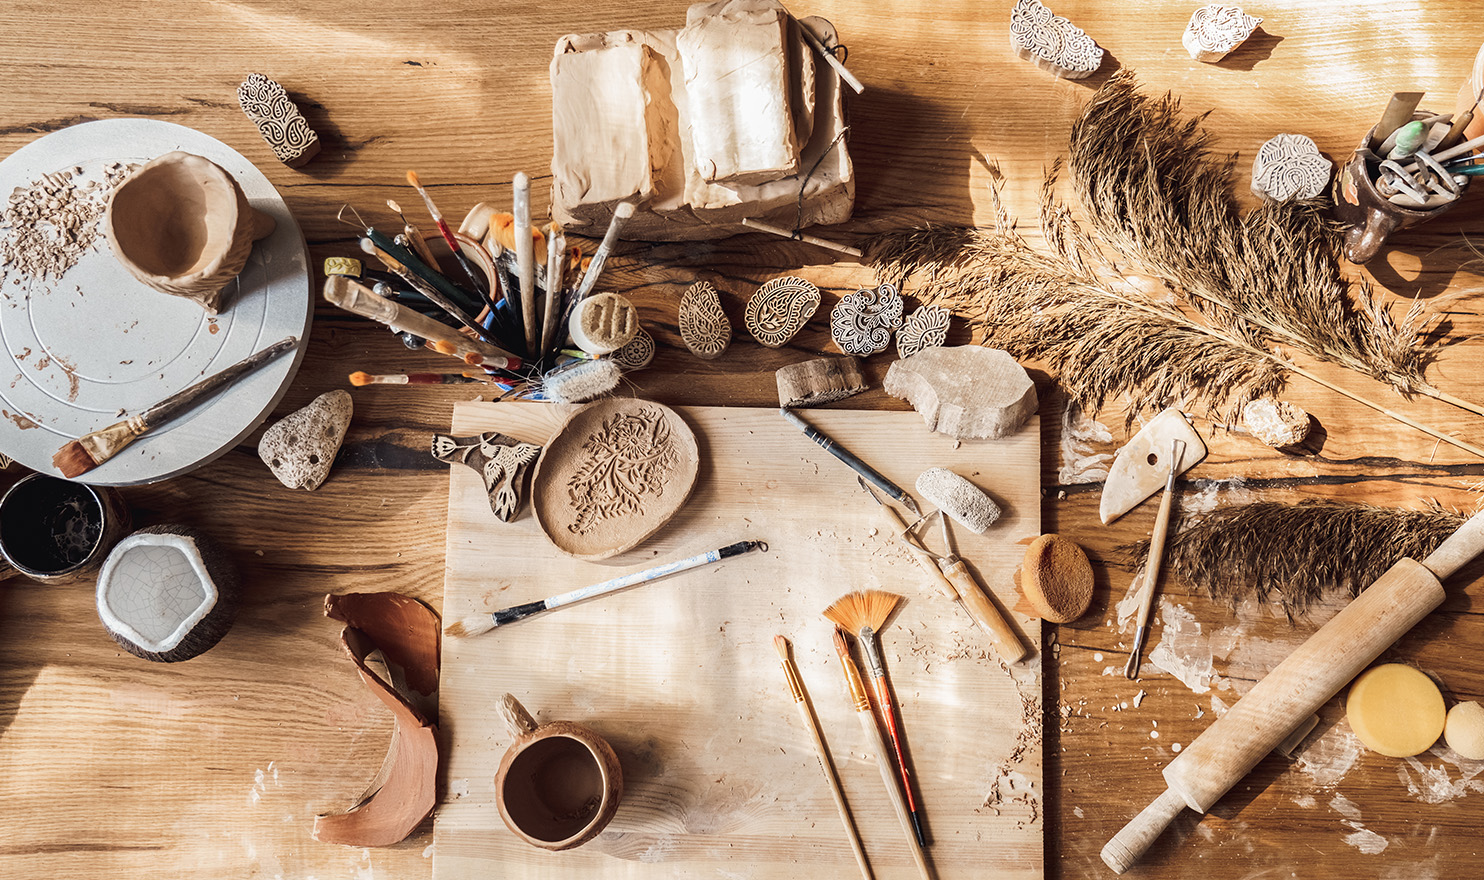 A set of clay and pottery tools lay on a crafting table in the home studio of an artist.